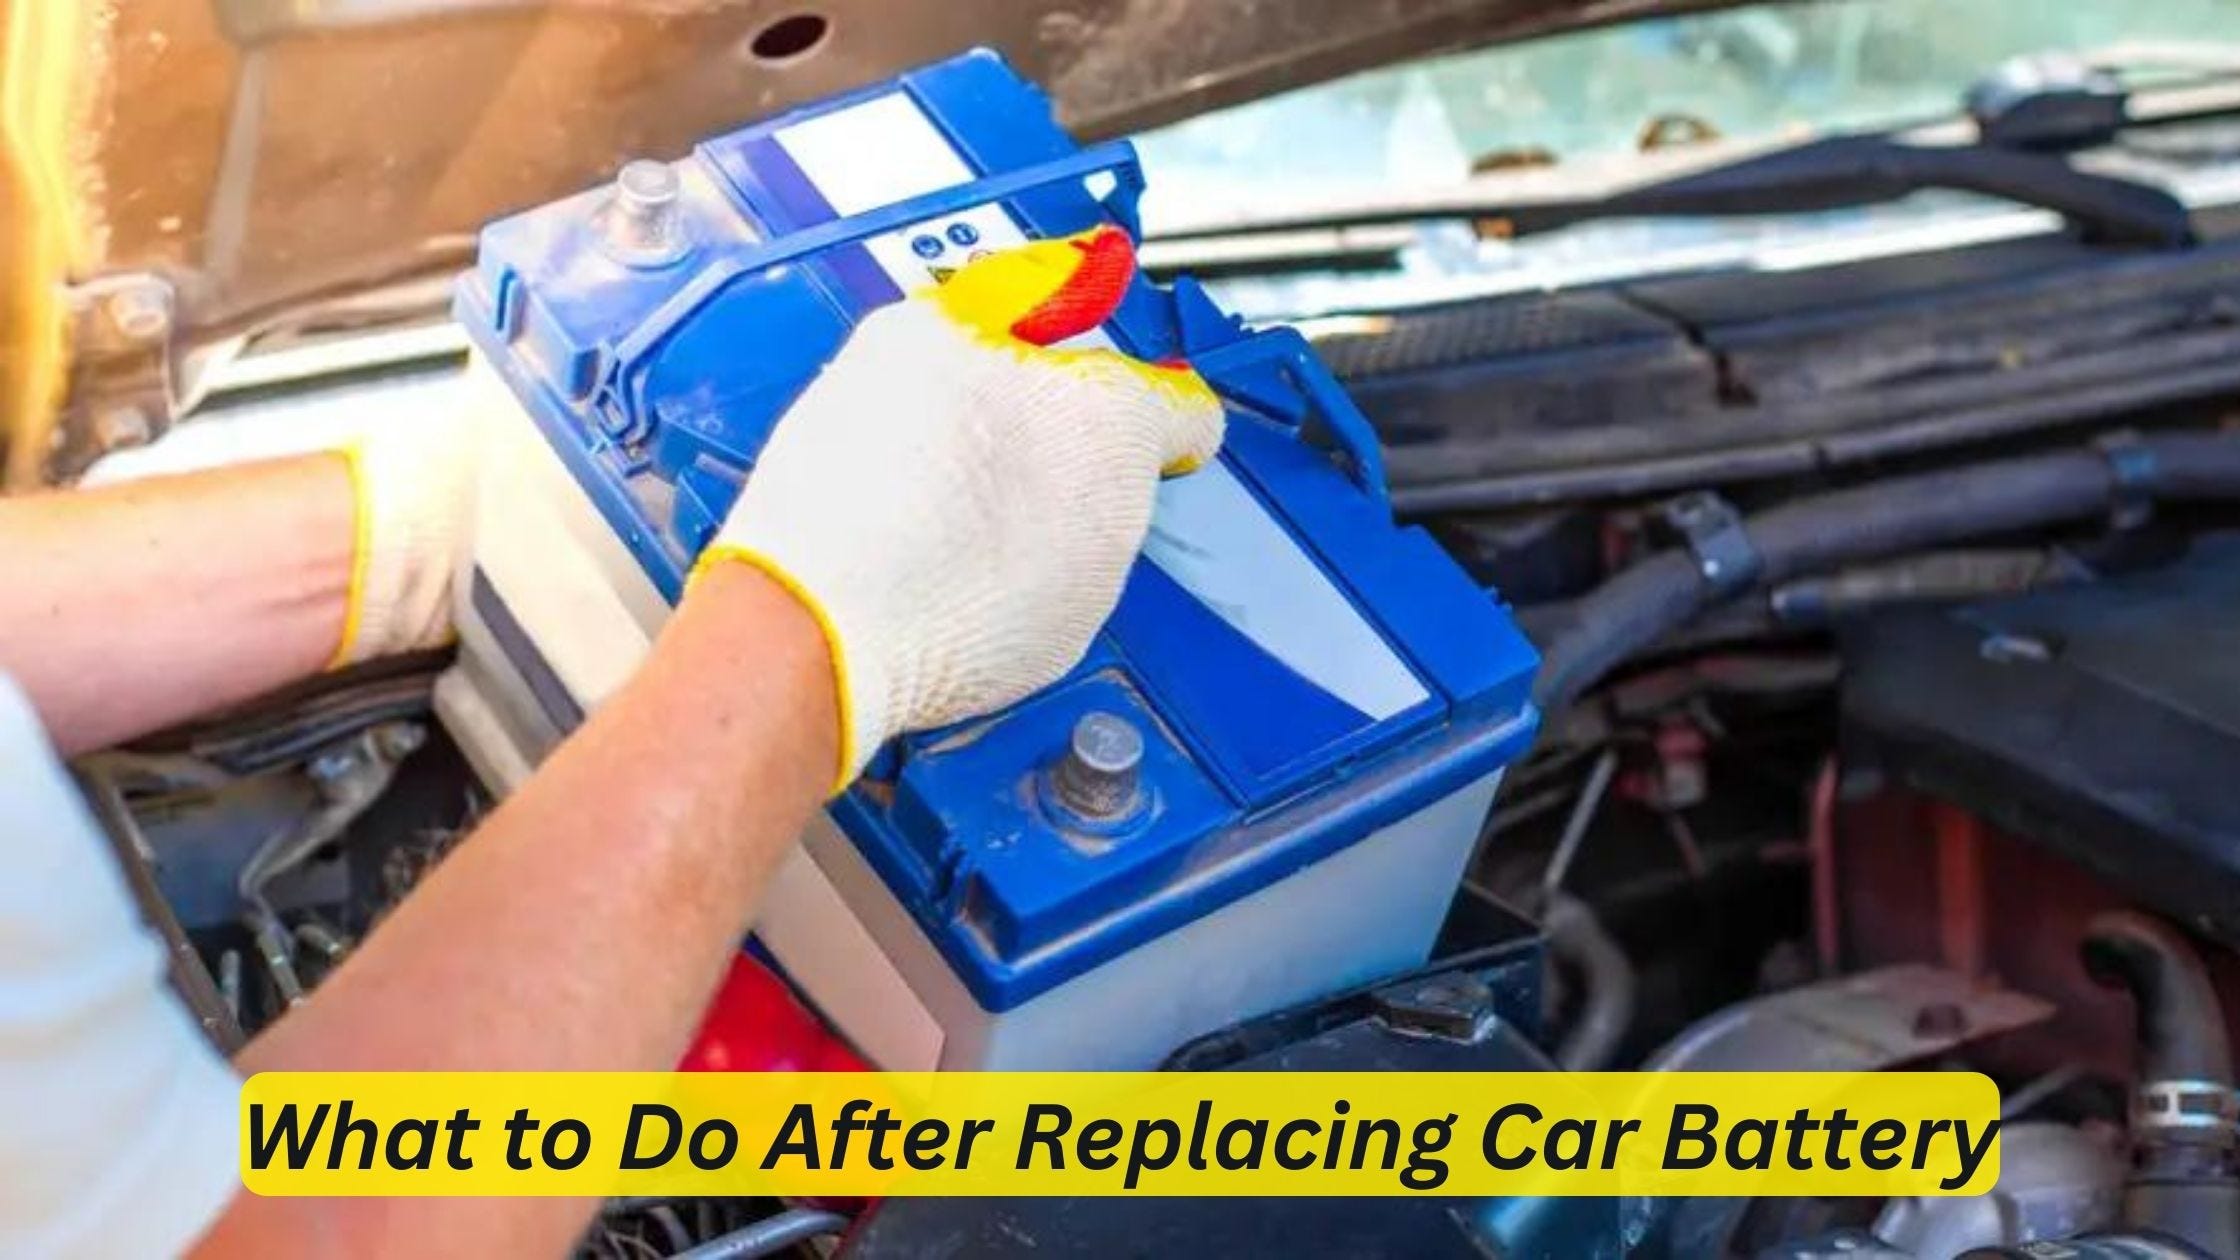 What to Do After Replacing Car Battery